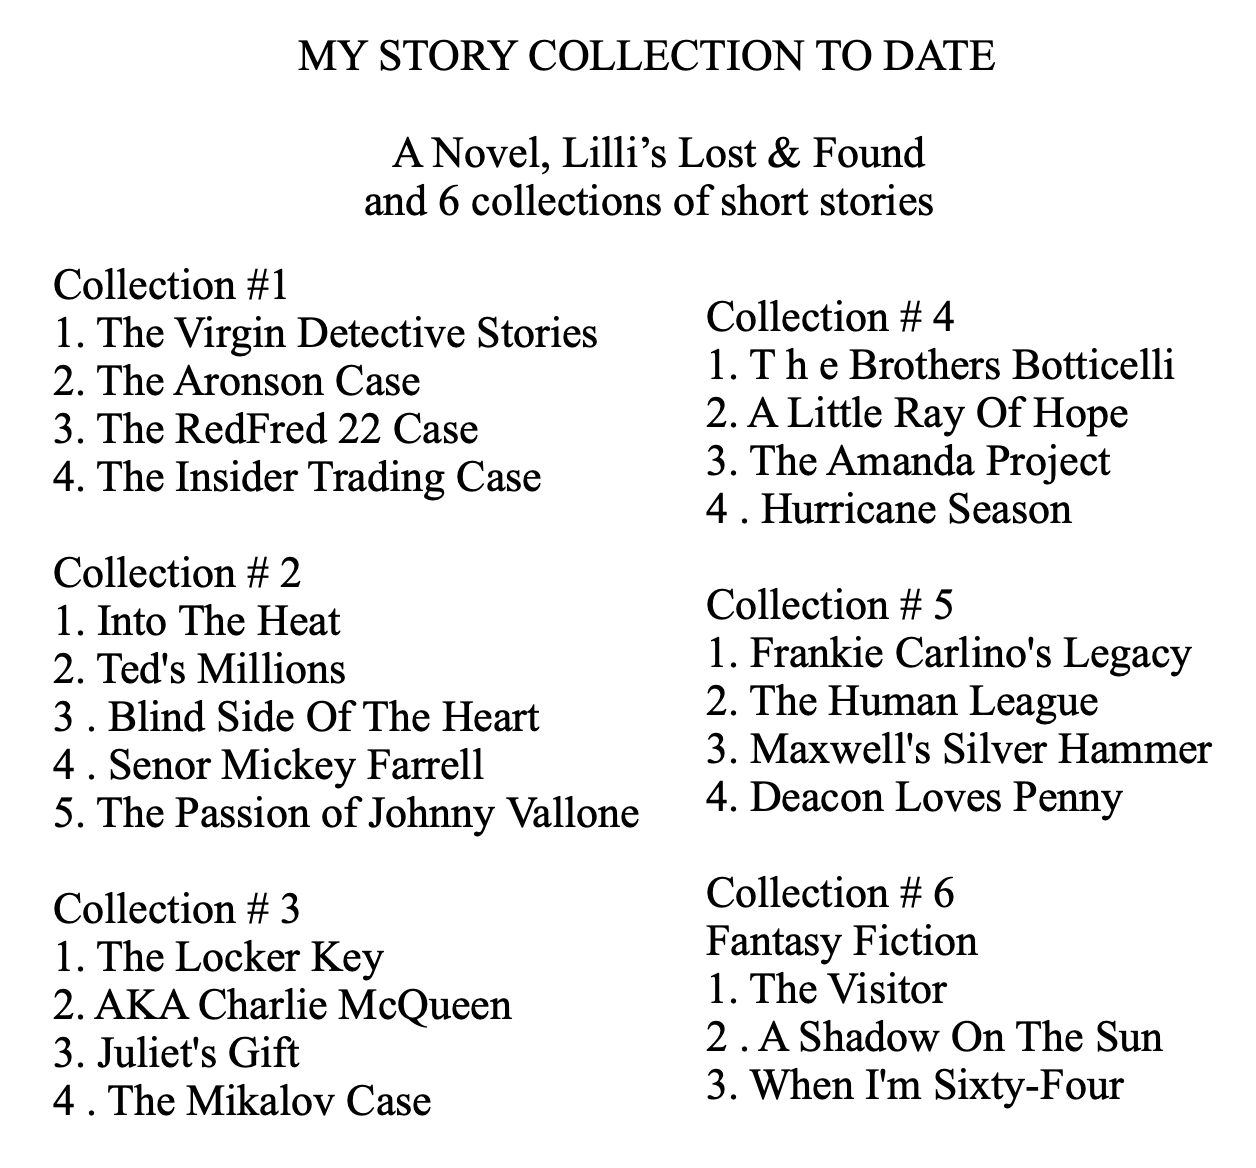 MY STORY COLLECTION TO DATE

A Novel, Lilli’s Lost & Found
and 6 collections of short stories

Collection #1

1. The Virgin Detective Stories
2. The Aronson Case

3. The RedFred 22 Case

4. The Insider Trading Case

Collection # 2

1. Into The Heat

2. Ted's Millions

3. Blind Side Of The Heart

4 . Senor Mickey Farrell

5S. The Passion of Johnny Vallone

Collection # 3

1. The Locker Key

2. AKA Charlie McQueen
3. Juliet's Gift

4 . The Mikalov Case

Collection # 4

1. T h e Brothers Botticelli
2. A Little Ray Of Hope

3. The Amanda Project

4 . Hurricane Season

Collection # 5

1. Frankie Carlino's Legacy
2. The Human League

3. Maxwell's Silver Hammer
4. Deacon Loves Penny

Collection # 6

Fantasy Fiction

1. The Visitor

2 . A Shadow On The Sun
3. When I'm Sixty-Four